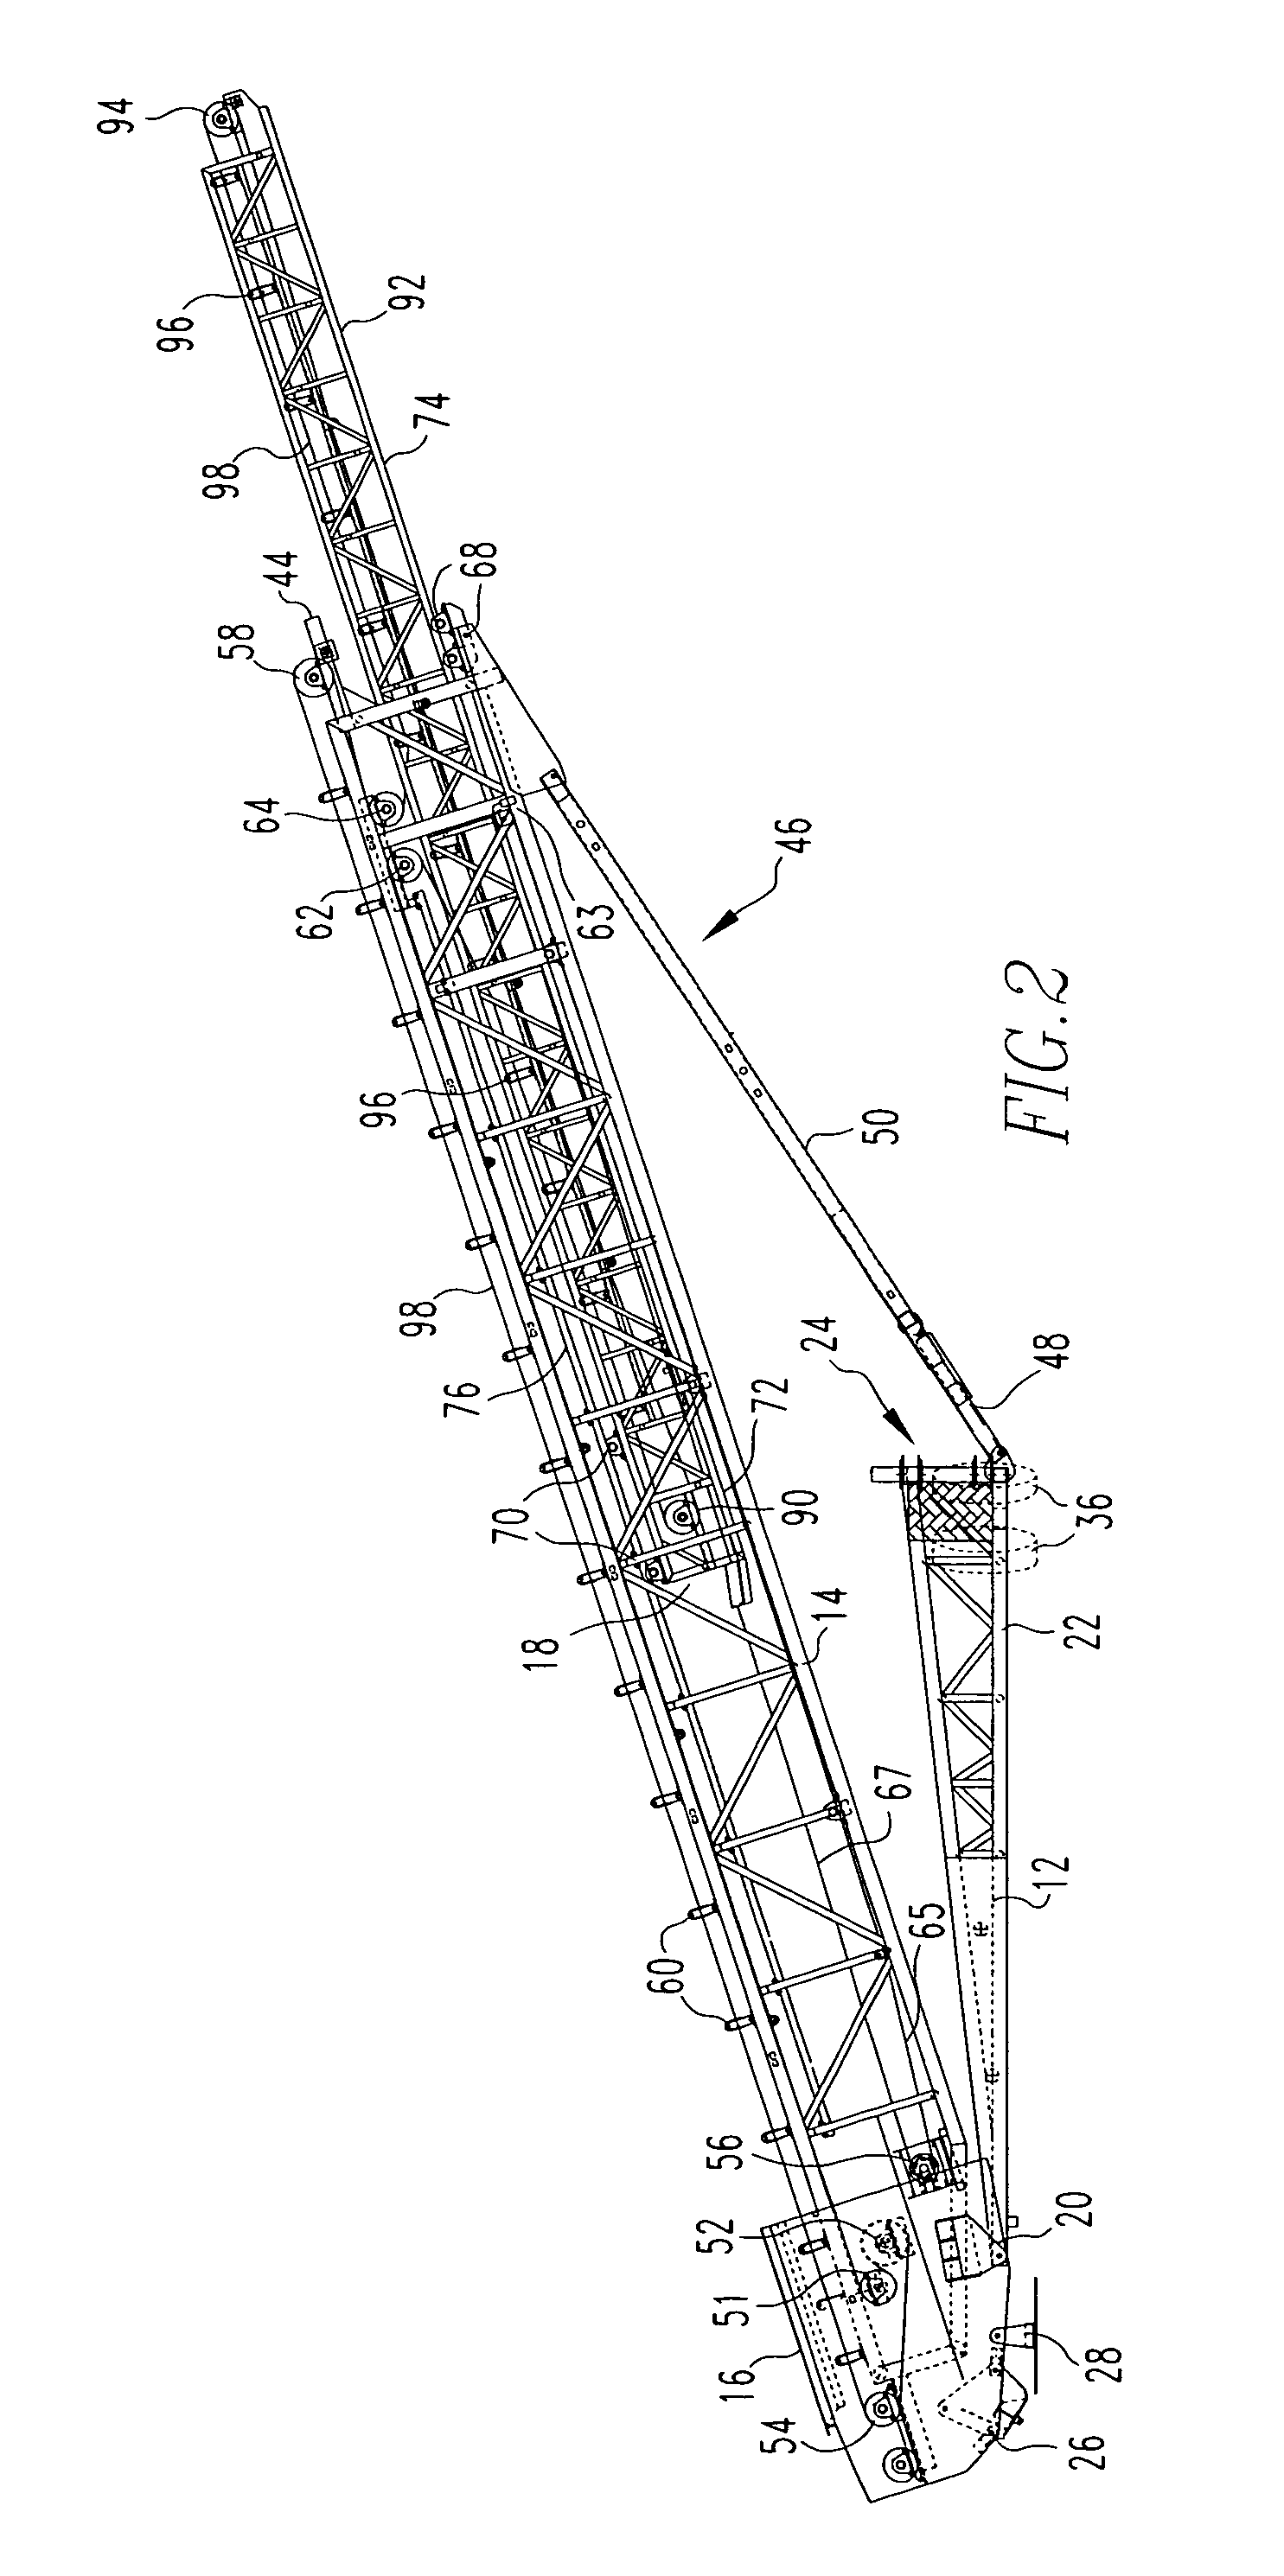 Telescoping stacking conveyor having a single conveyor belt and single drive mechanism for the belt